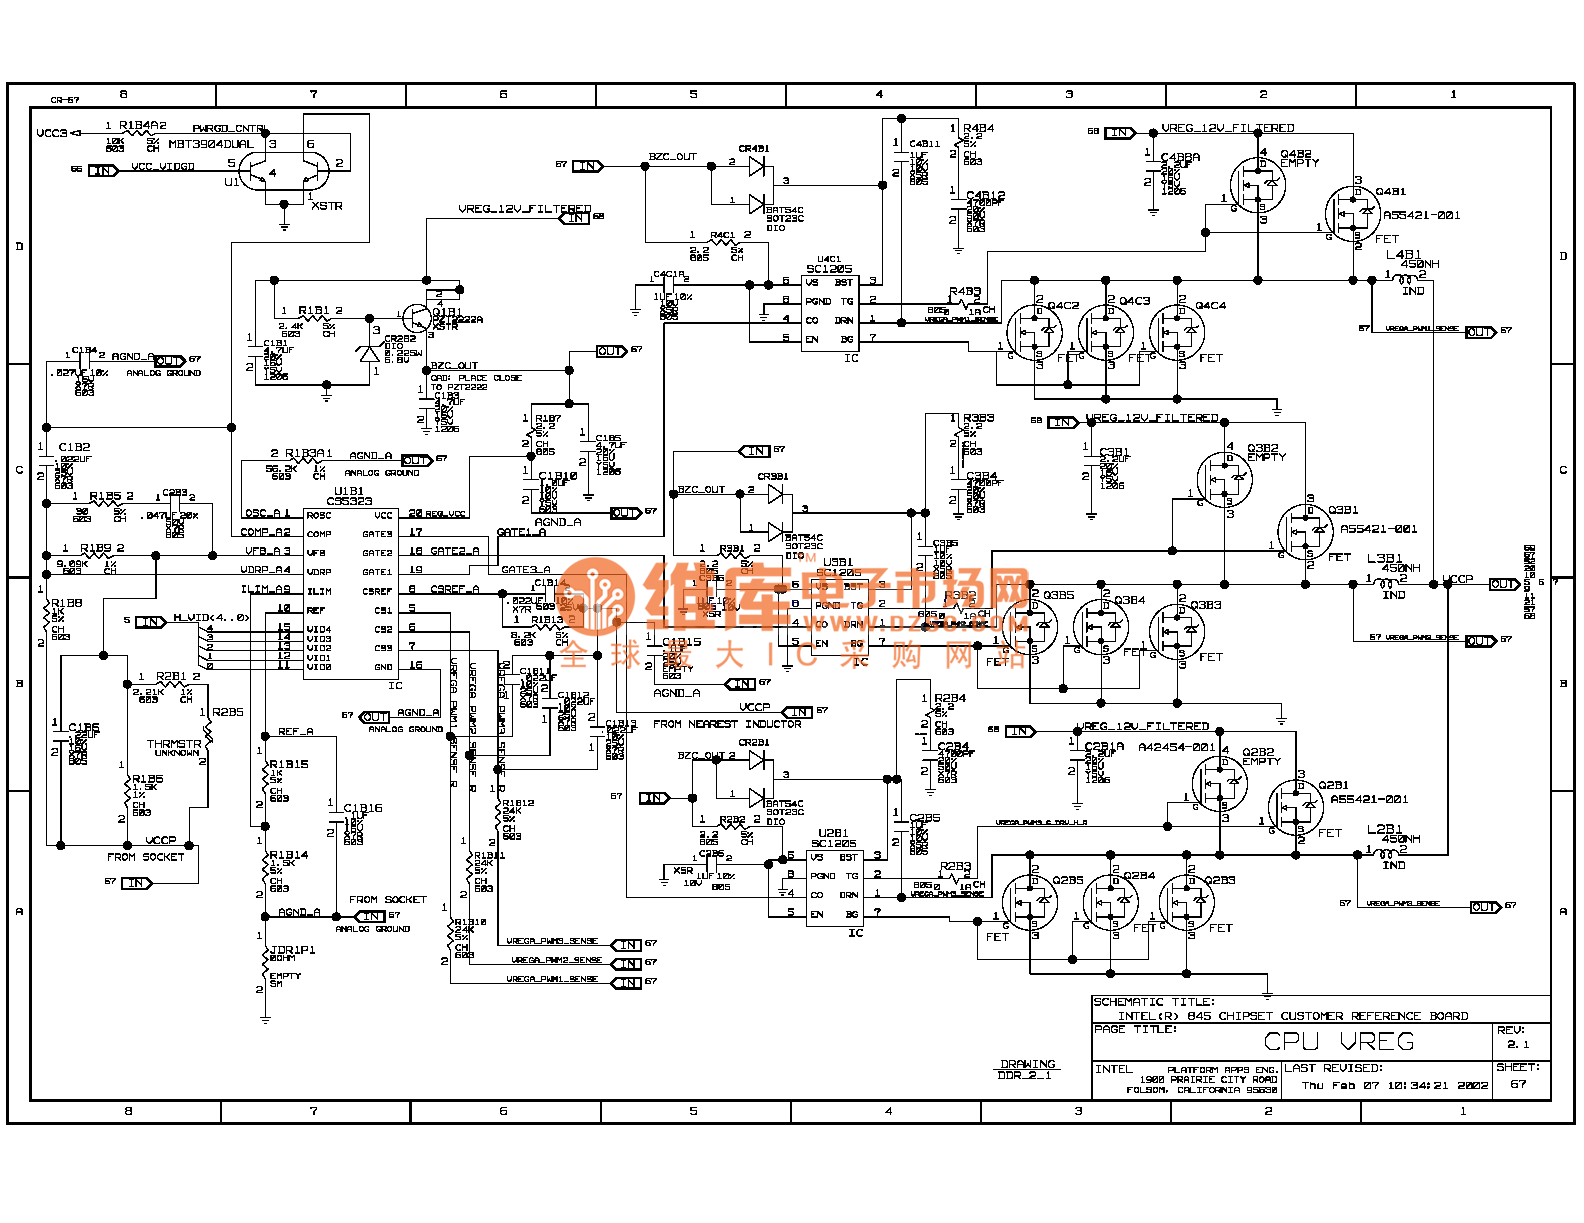 845ddr computer motherboard circuit diagram 67 - Computer-Related